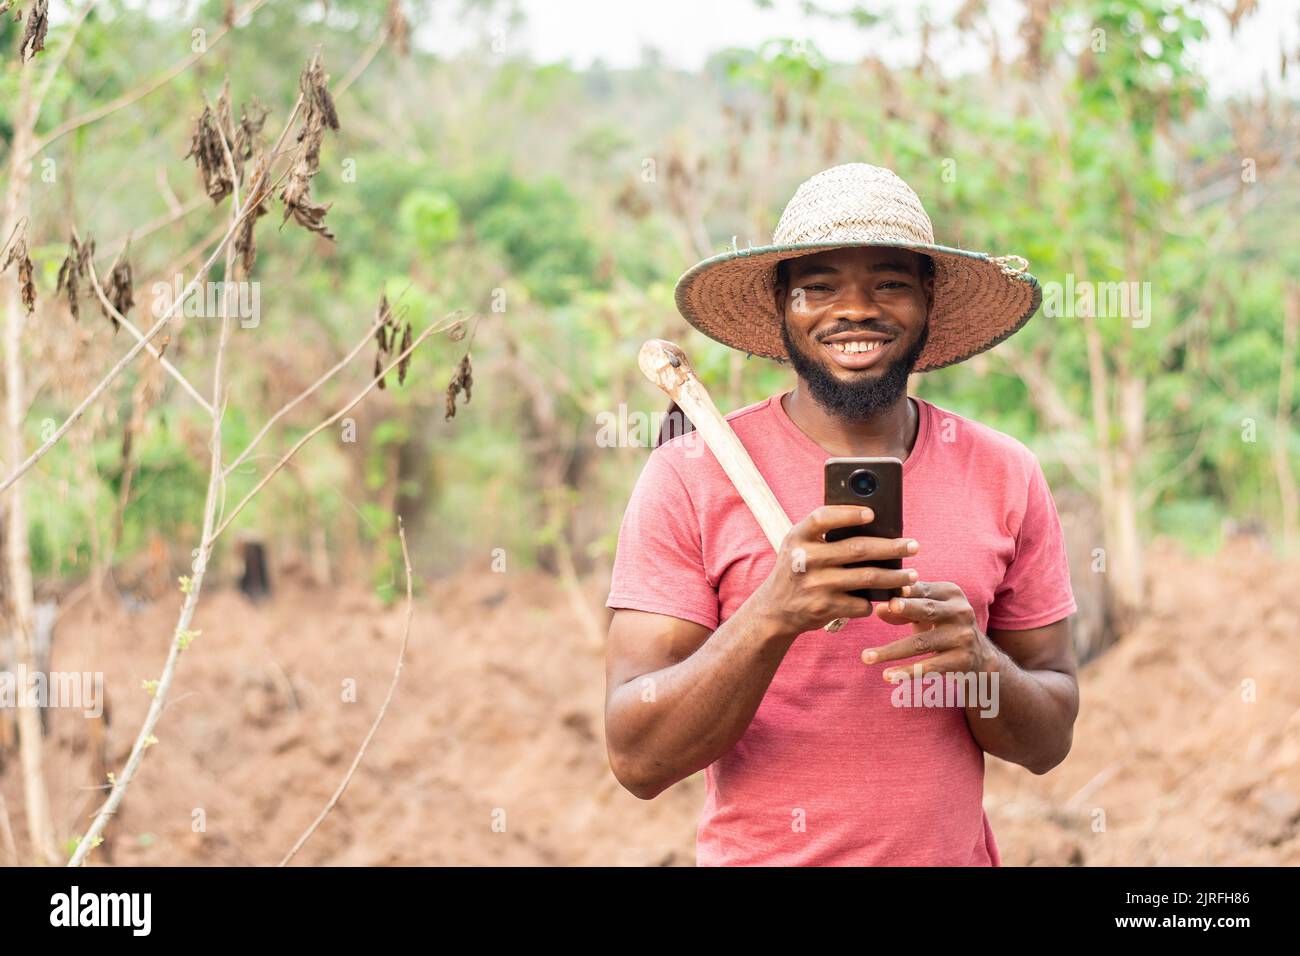 african farmer checking his phone Stock Photo